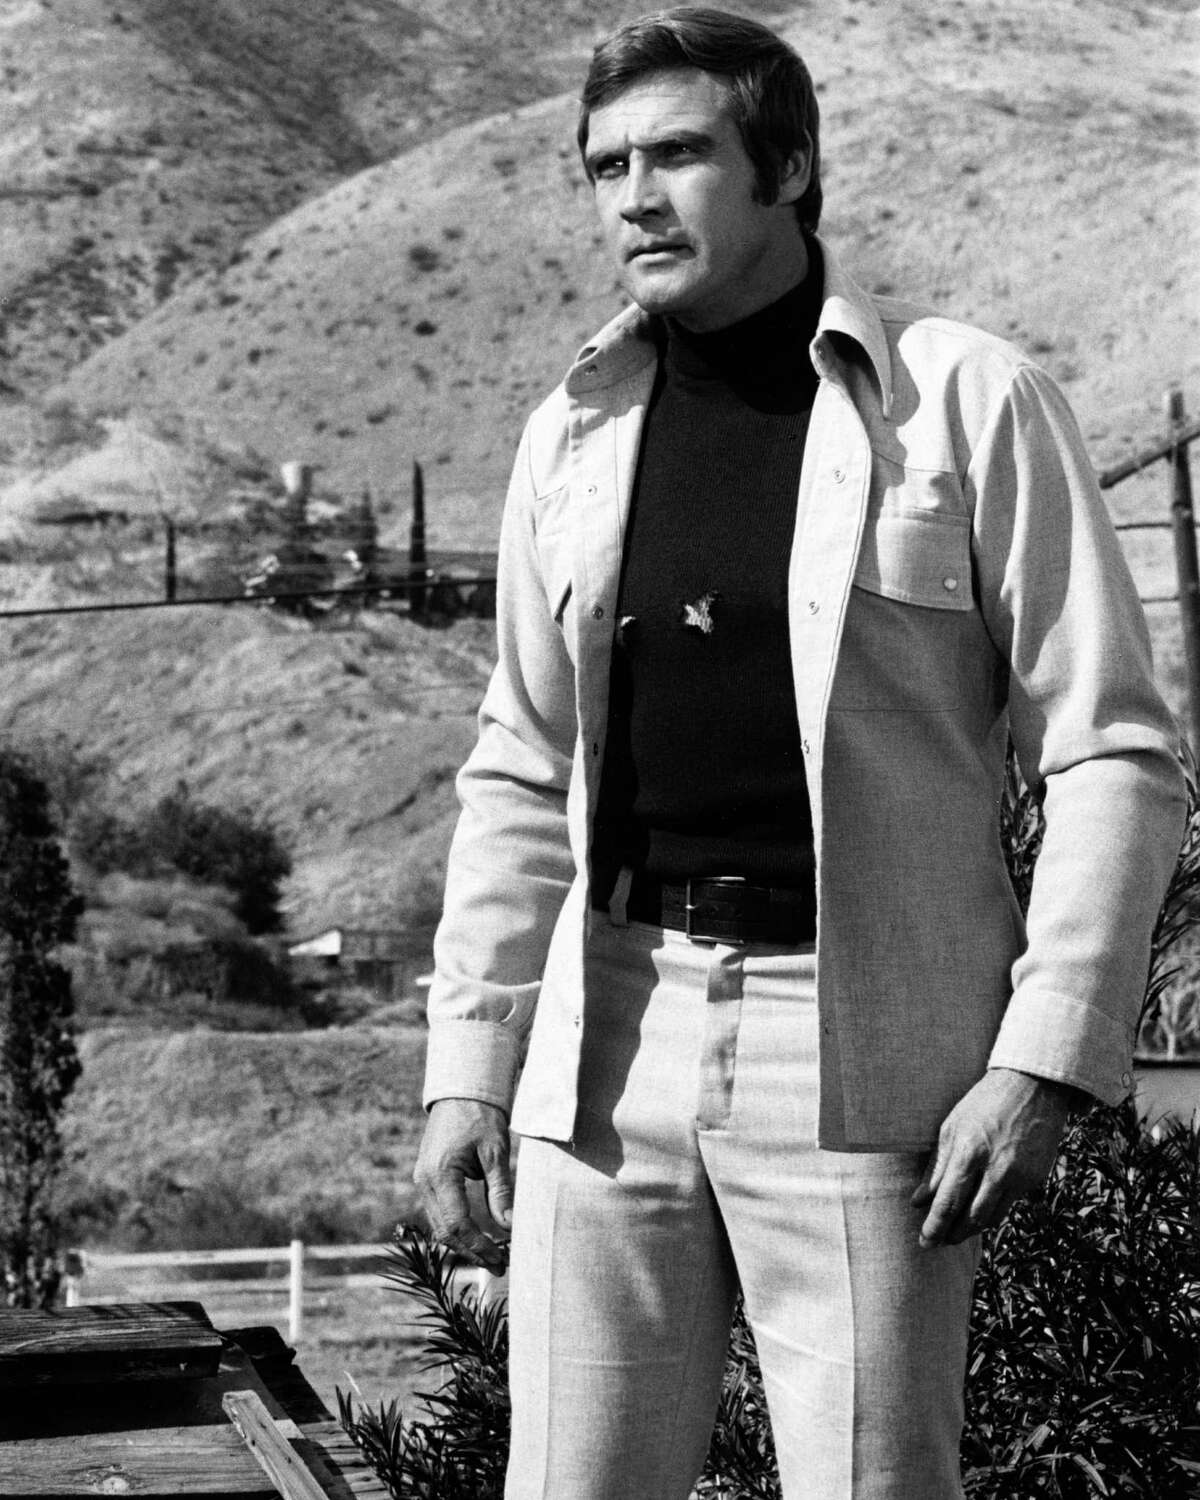 Lee Majors starred as Col. Steve Austin, the bionic man, in "The Six Million Dollar Man" in the 1970s.